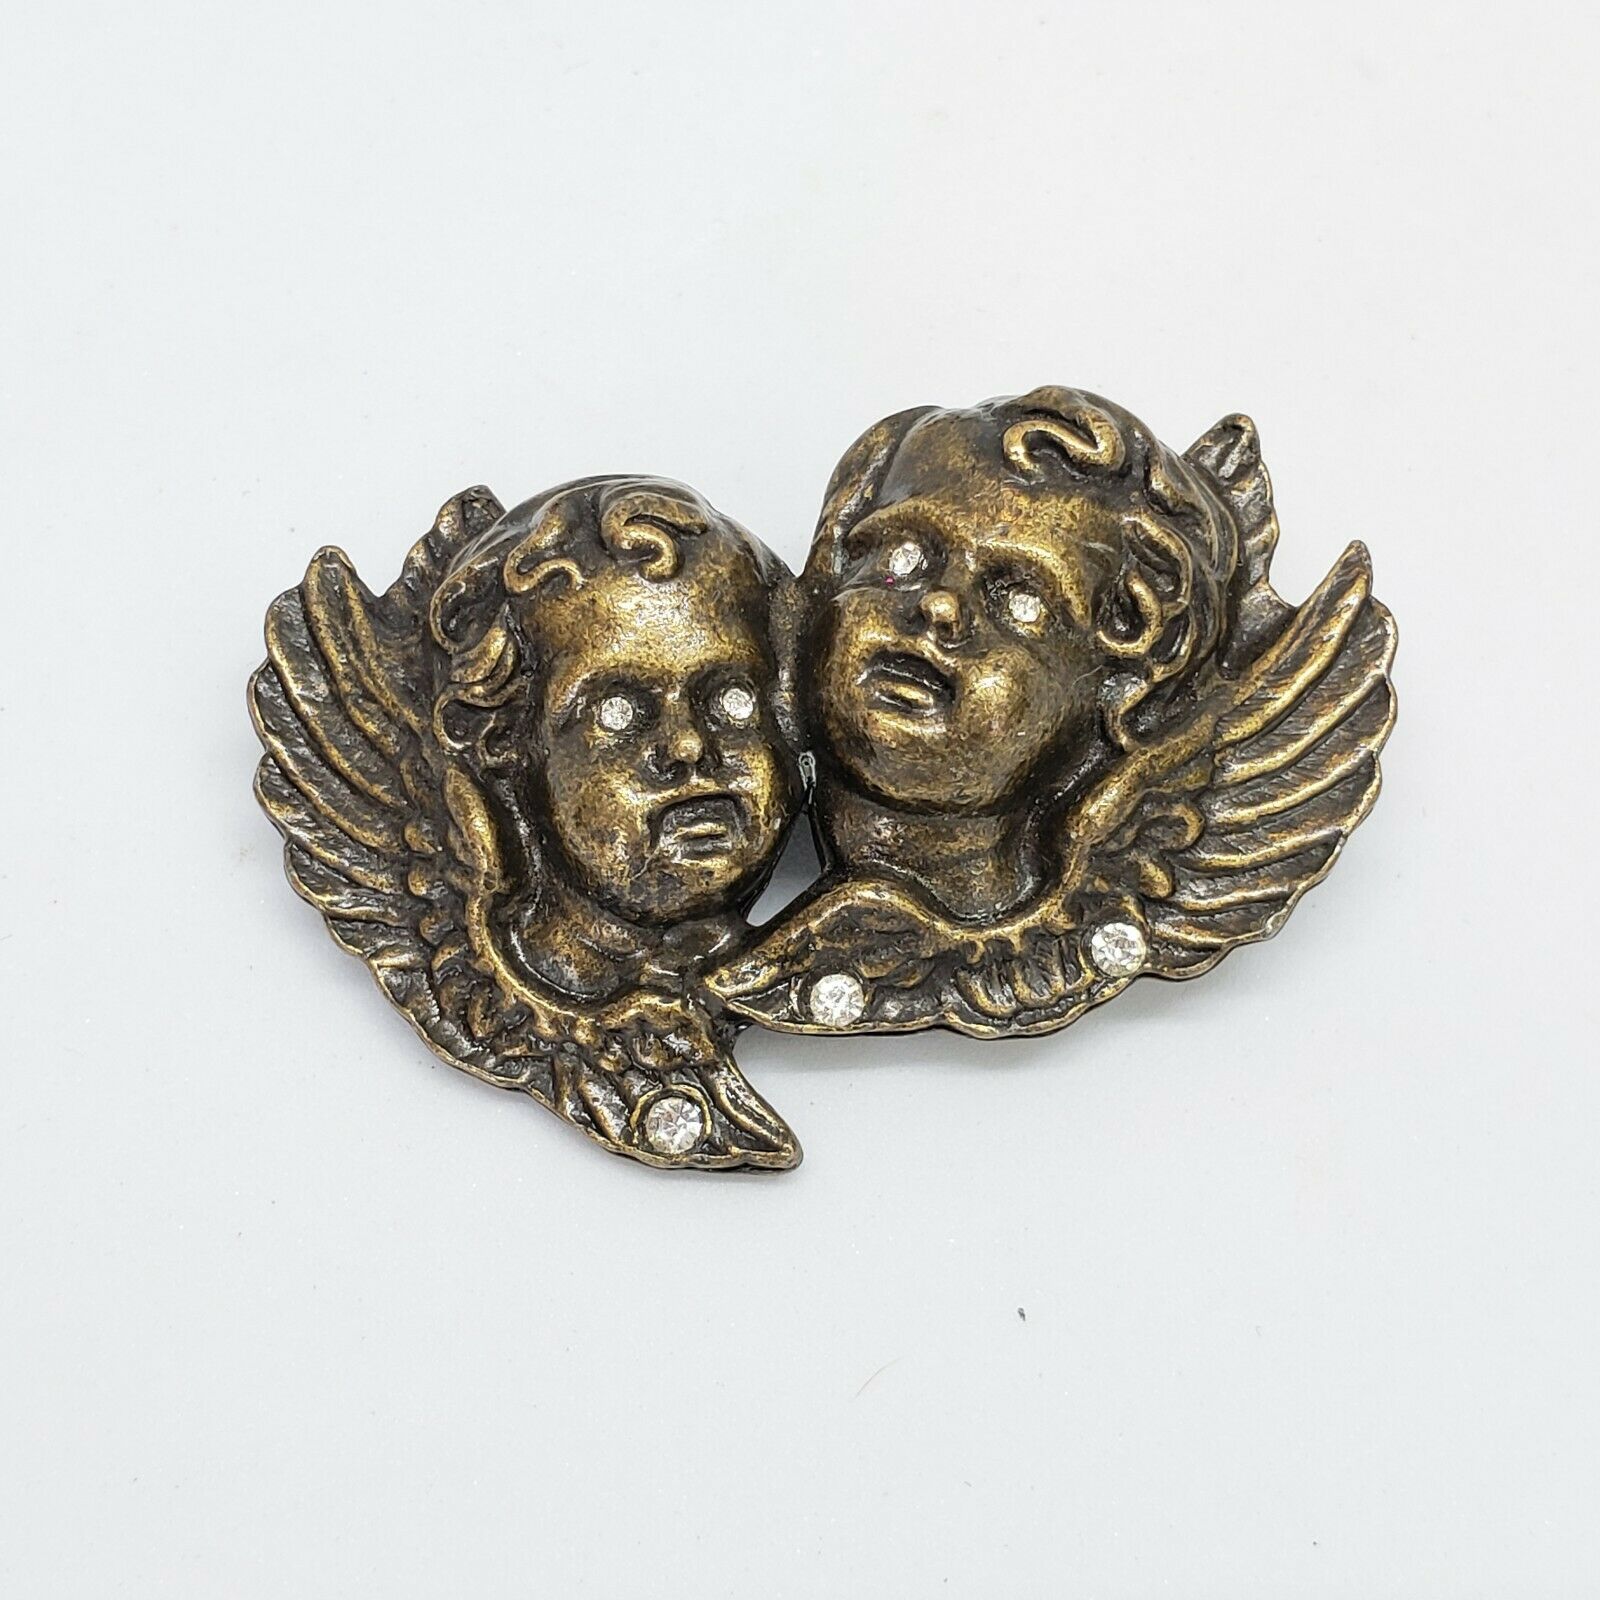 Vintage angel brooch pin with swirly pattern /& butterfly wings silver tone metal with white faux pearl ; about 1 12 x 1 in.